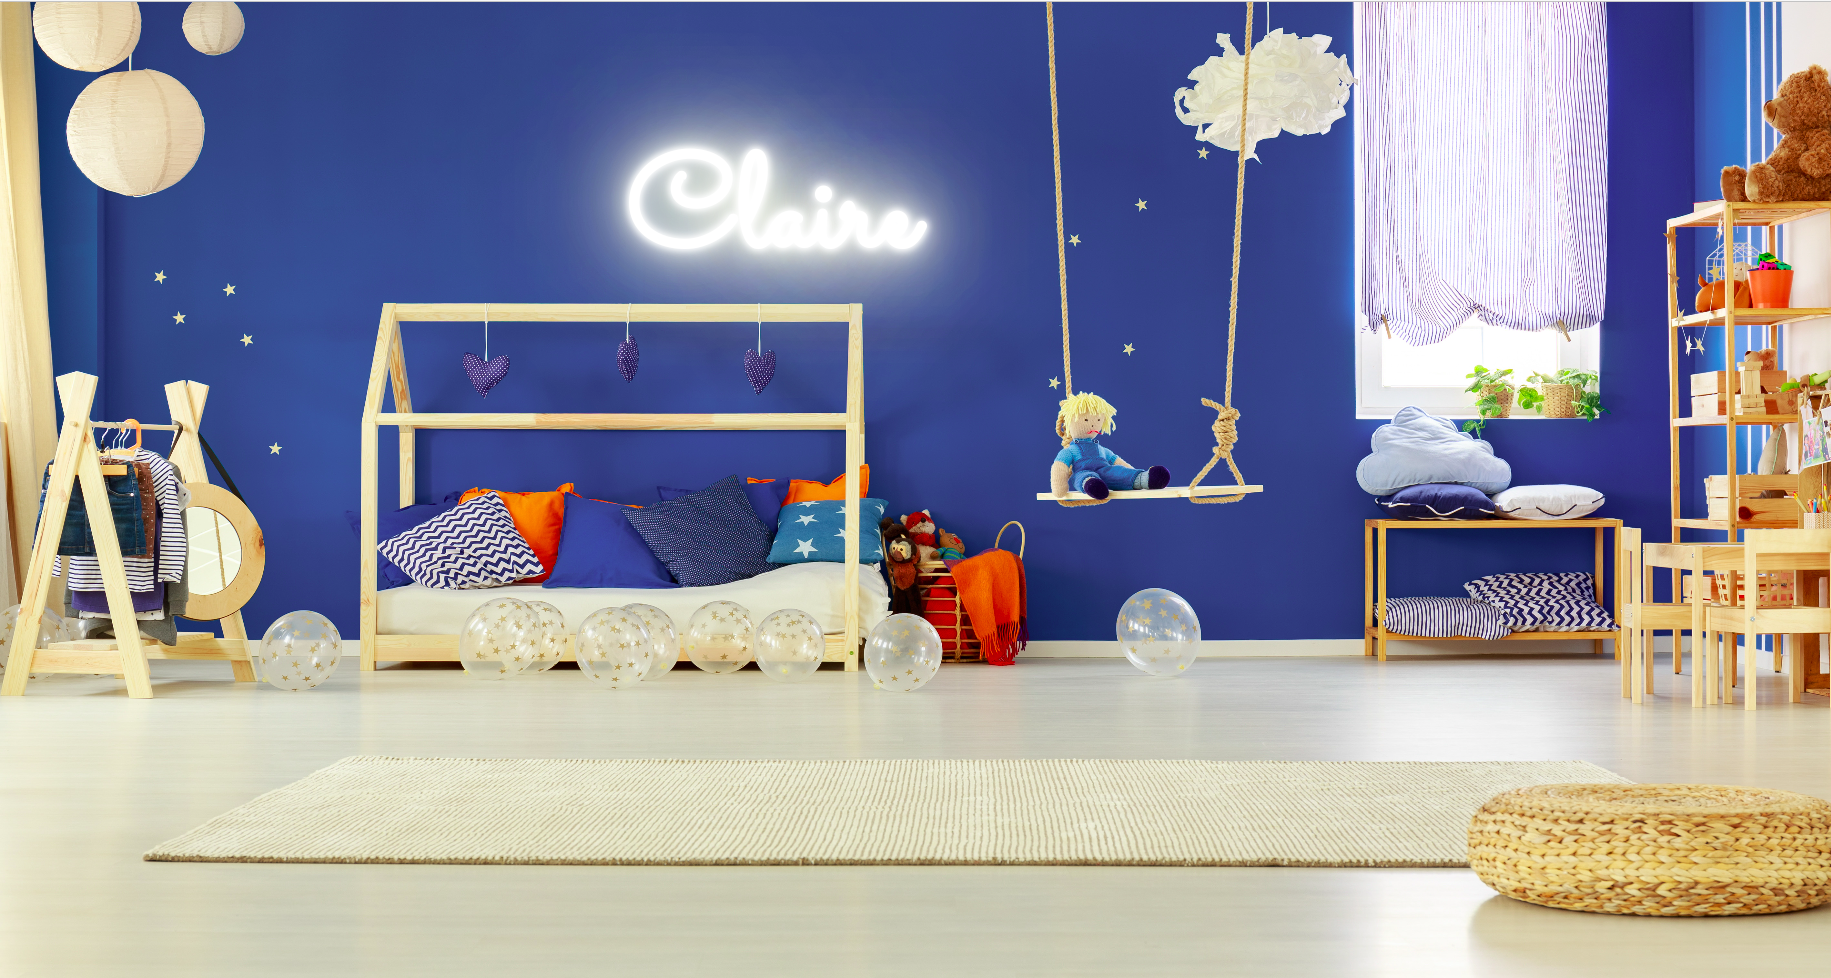 "Claire" Baby Name LED Neon Sign